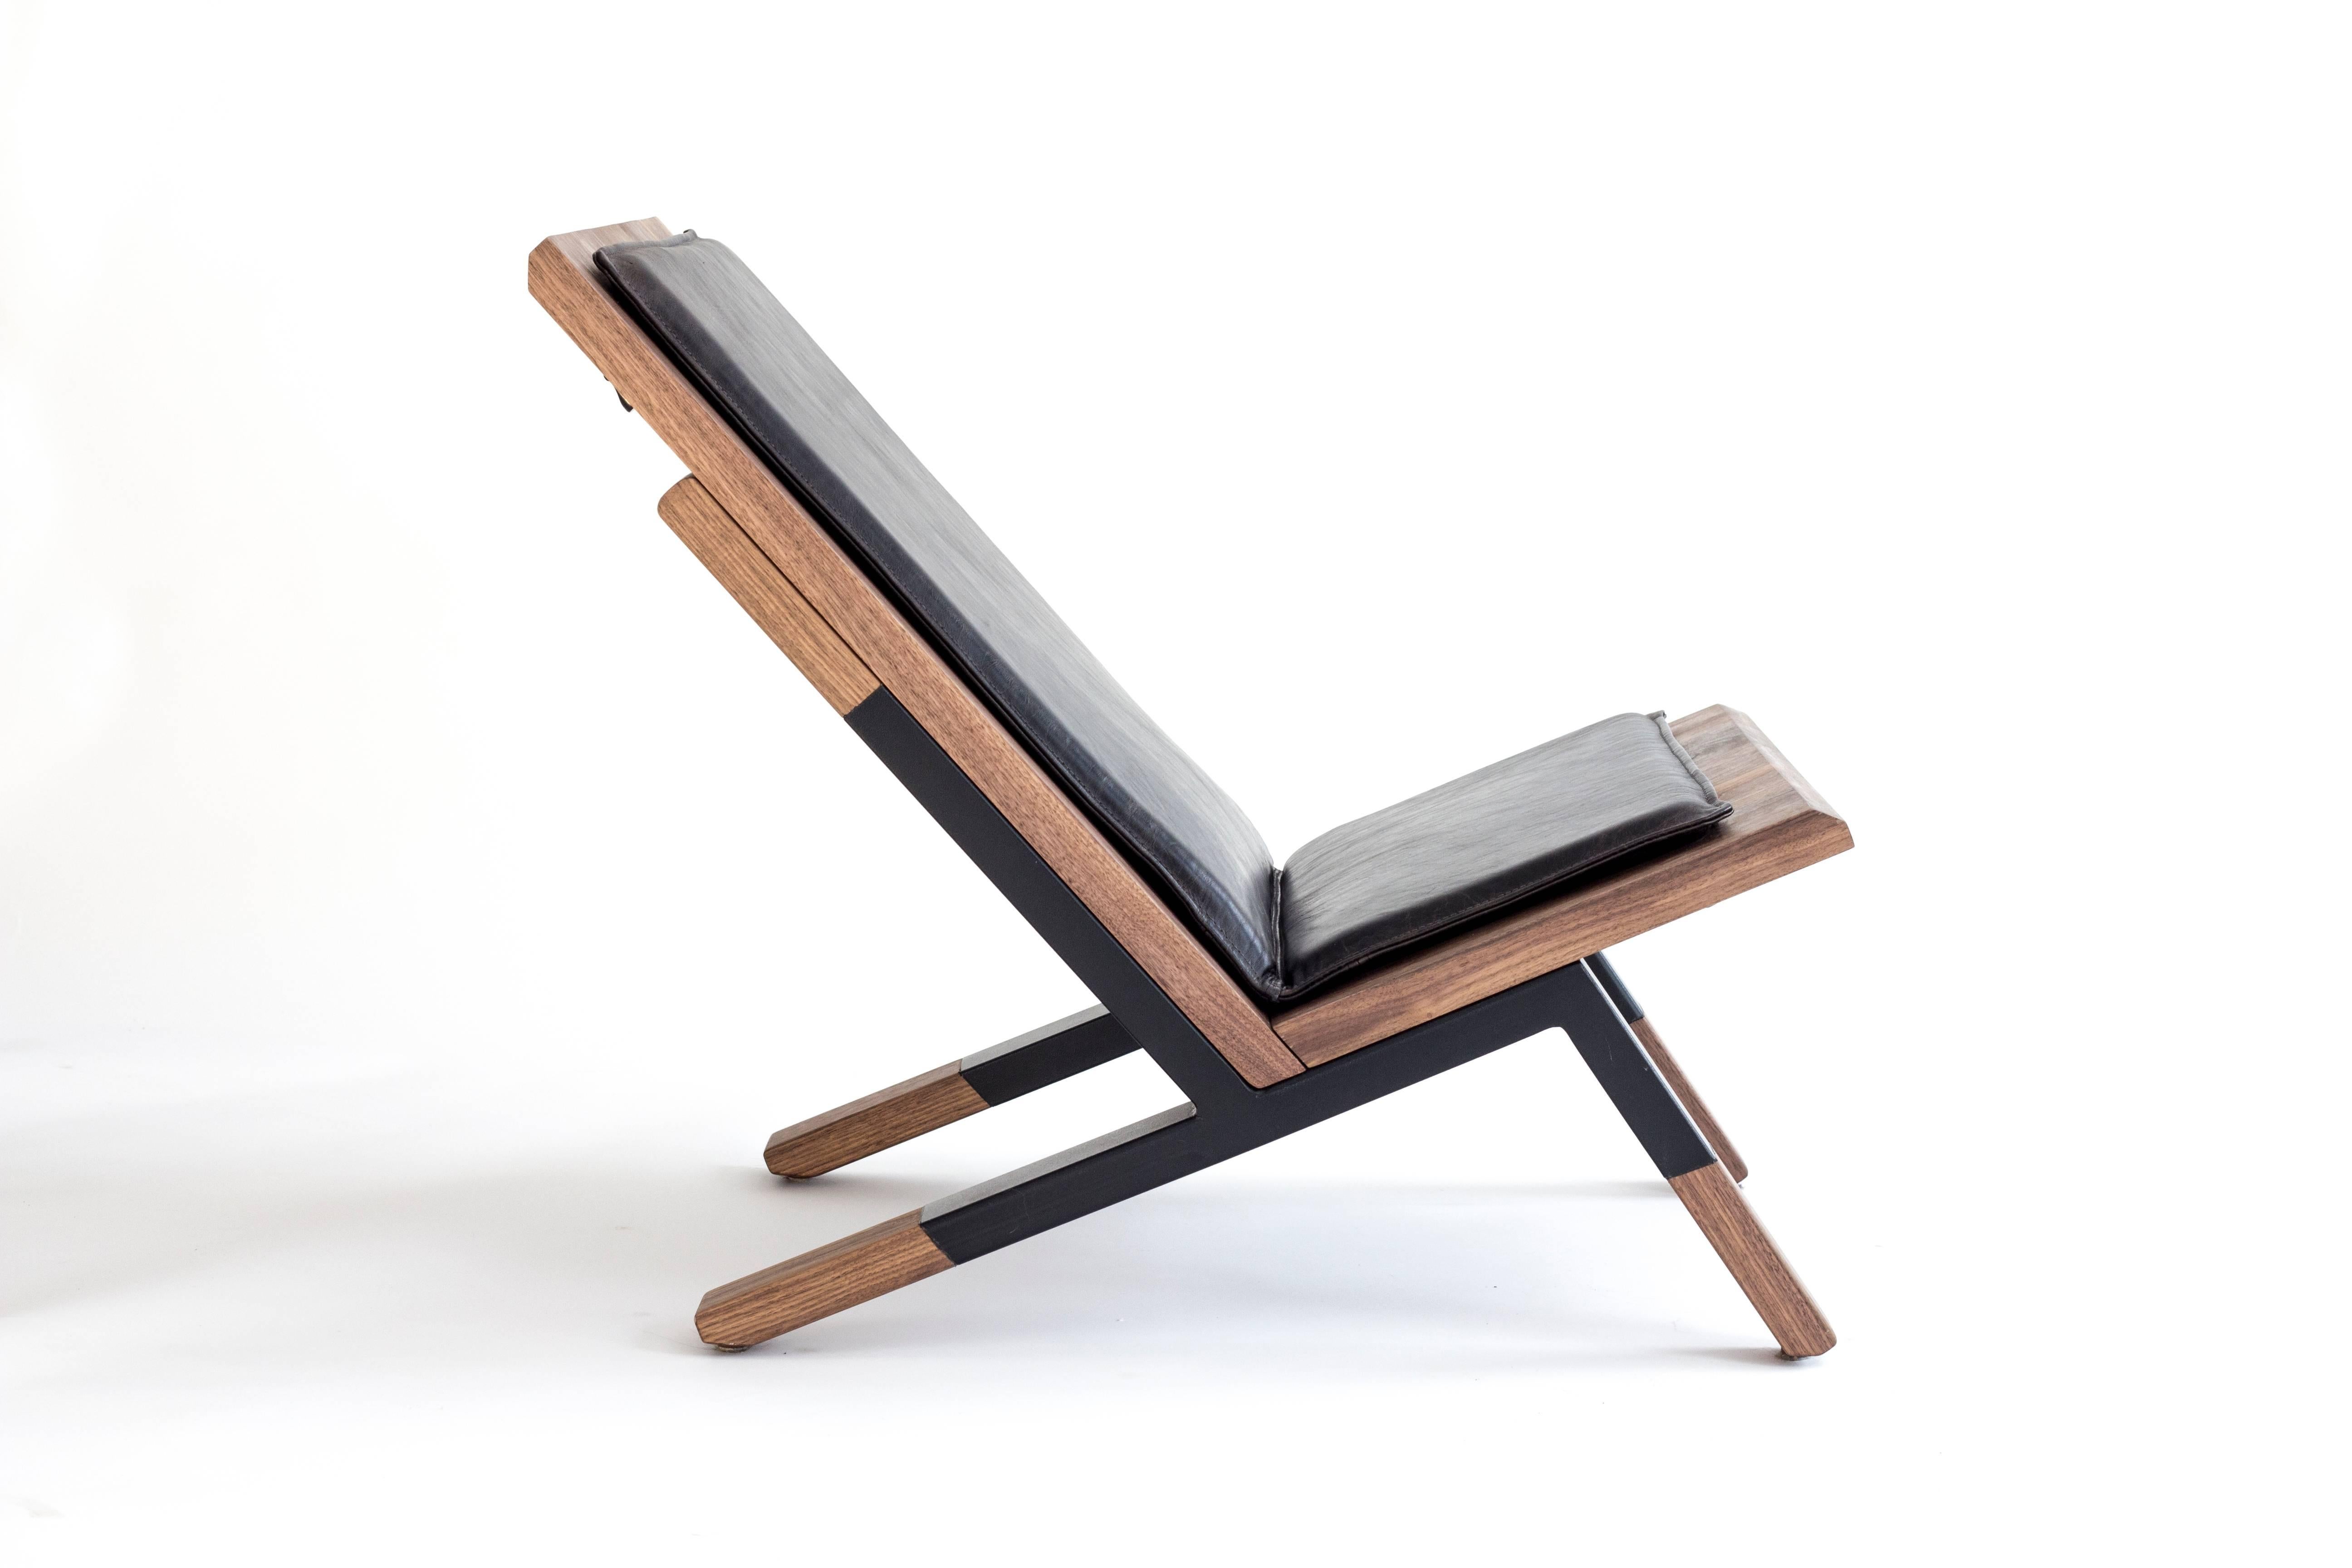 The Sartorii lounge chair, made of walnut and steel, is the result of an exploration of the ritual of relaxation, a search for physical rest.

Its contemporary formal design reveals simple and sophisticated lines transmitting the ease of use and its